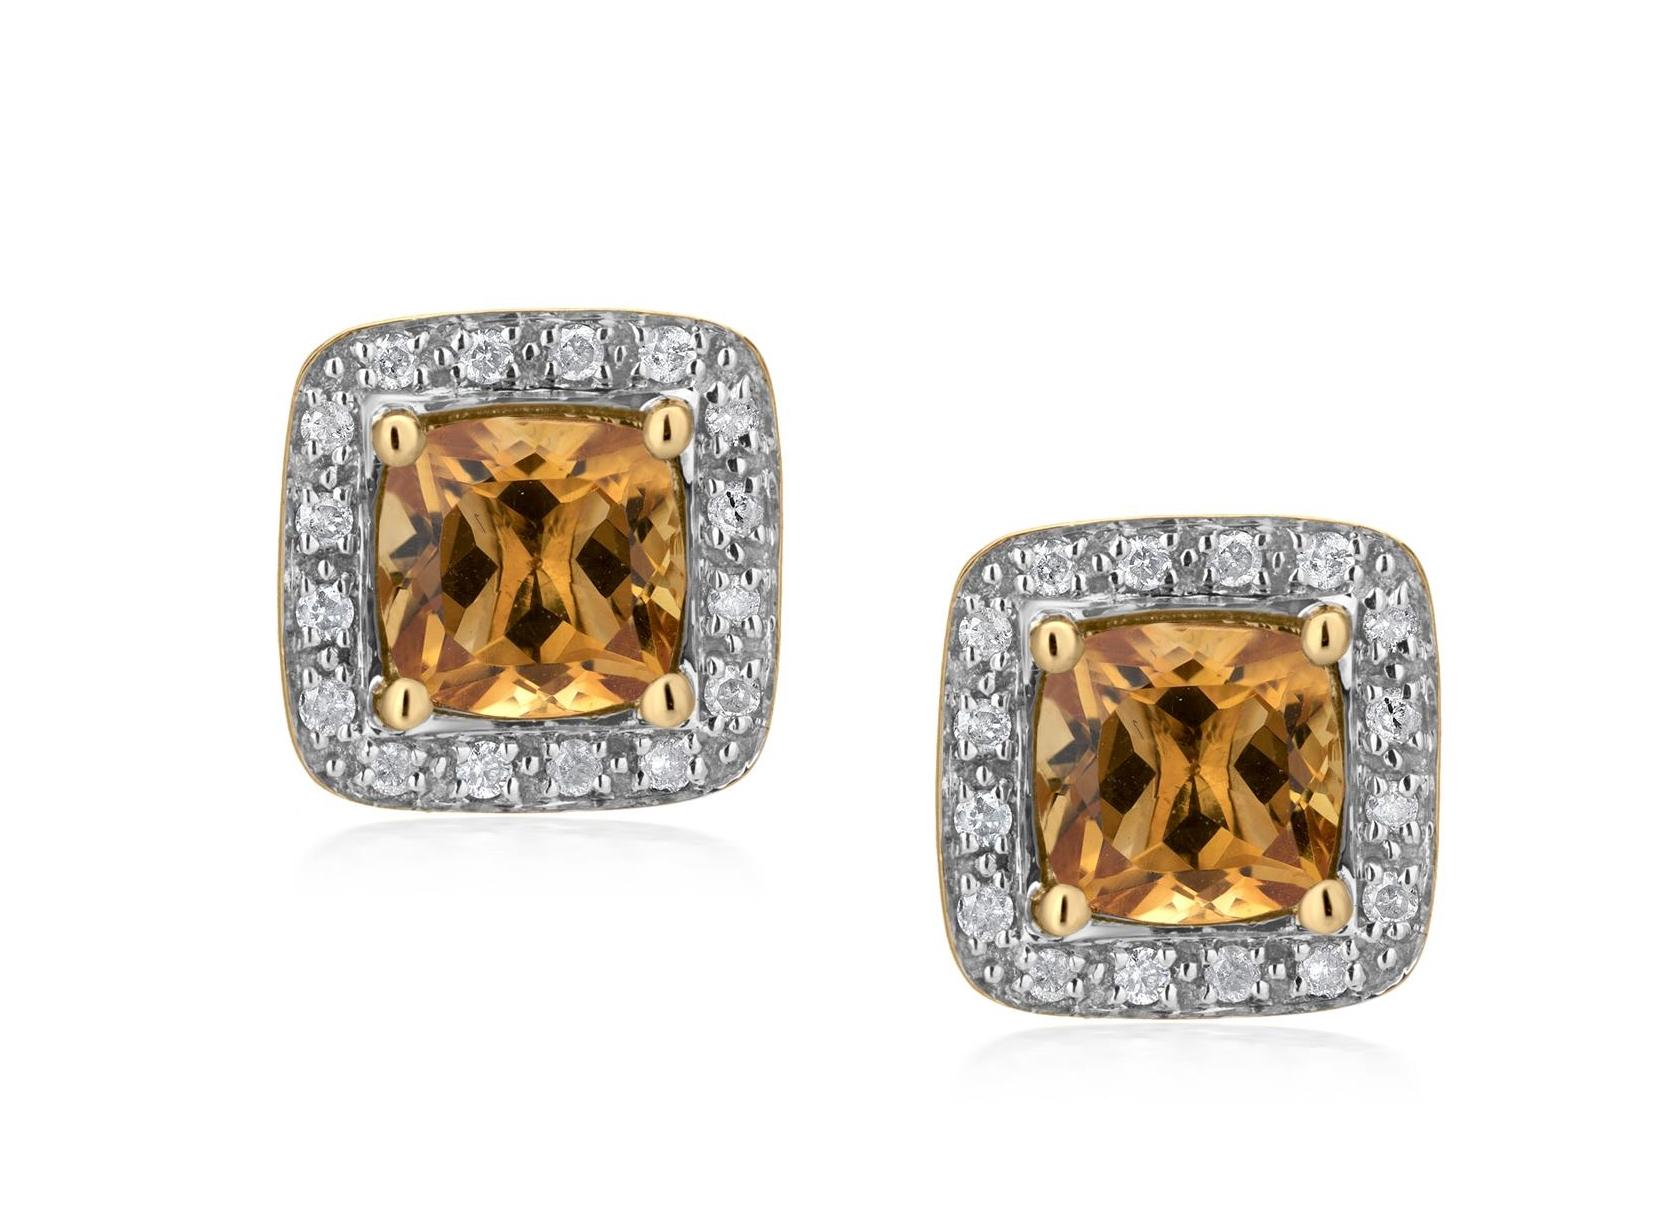 The sunny glow of these stud earrings evokes feelings of warmth and delight. This Gemistry stud earring features 6 mm cushion cut 1.78 carat citrines set in 14k yellow gold accentuated by halos of white pave. Post and Clutch, citrine stud